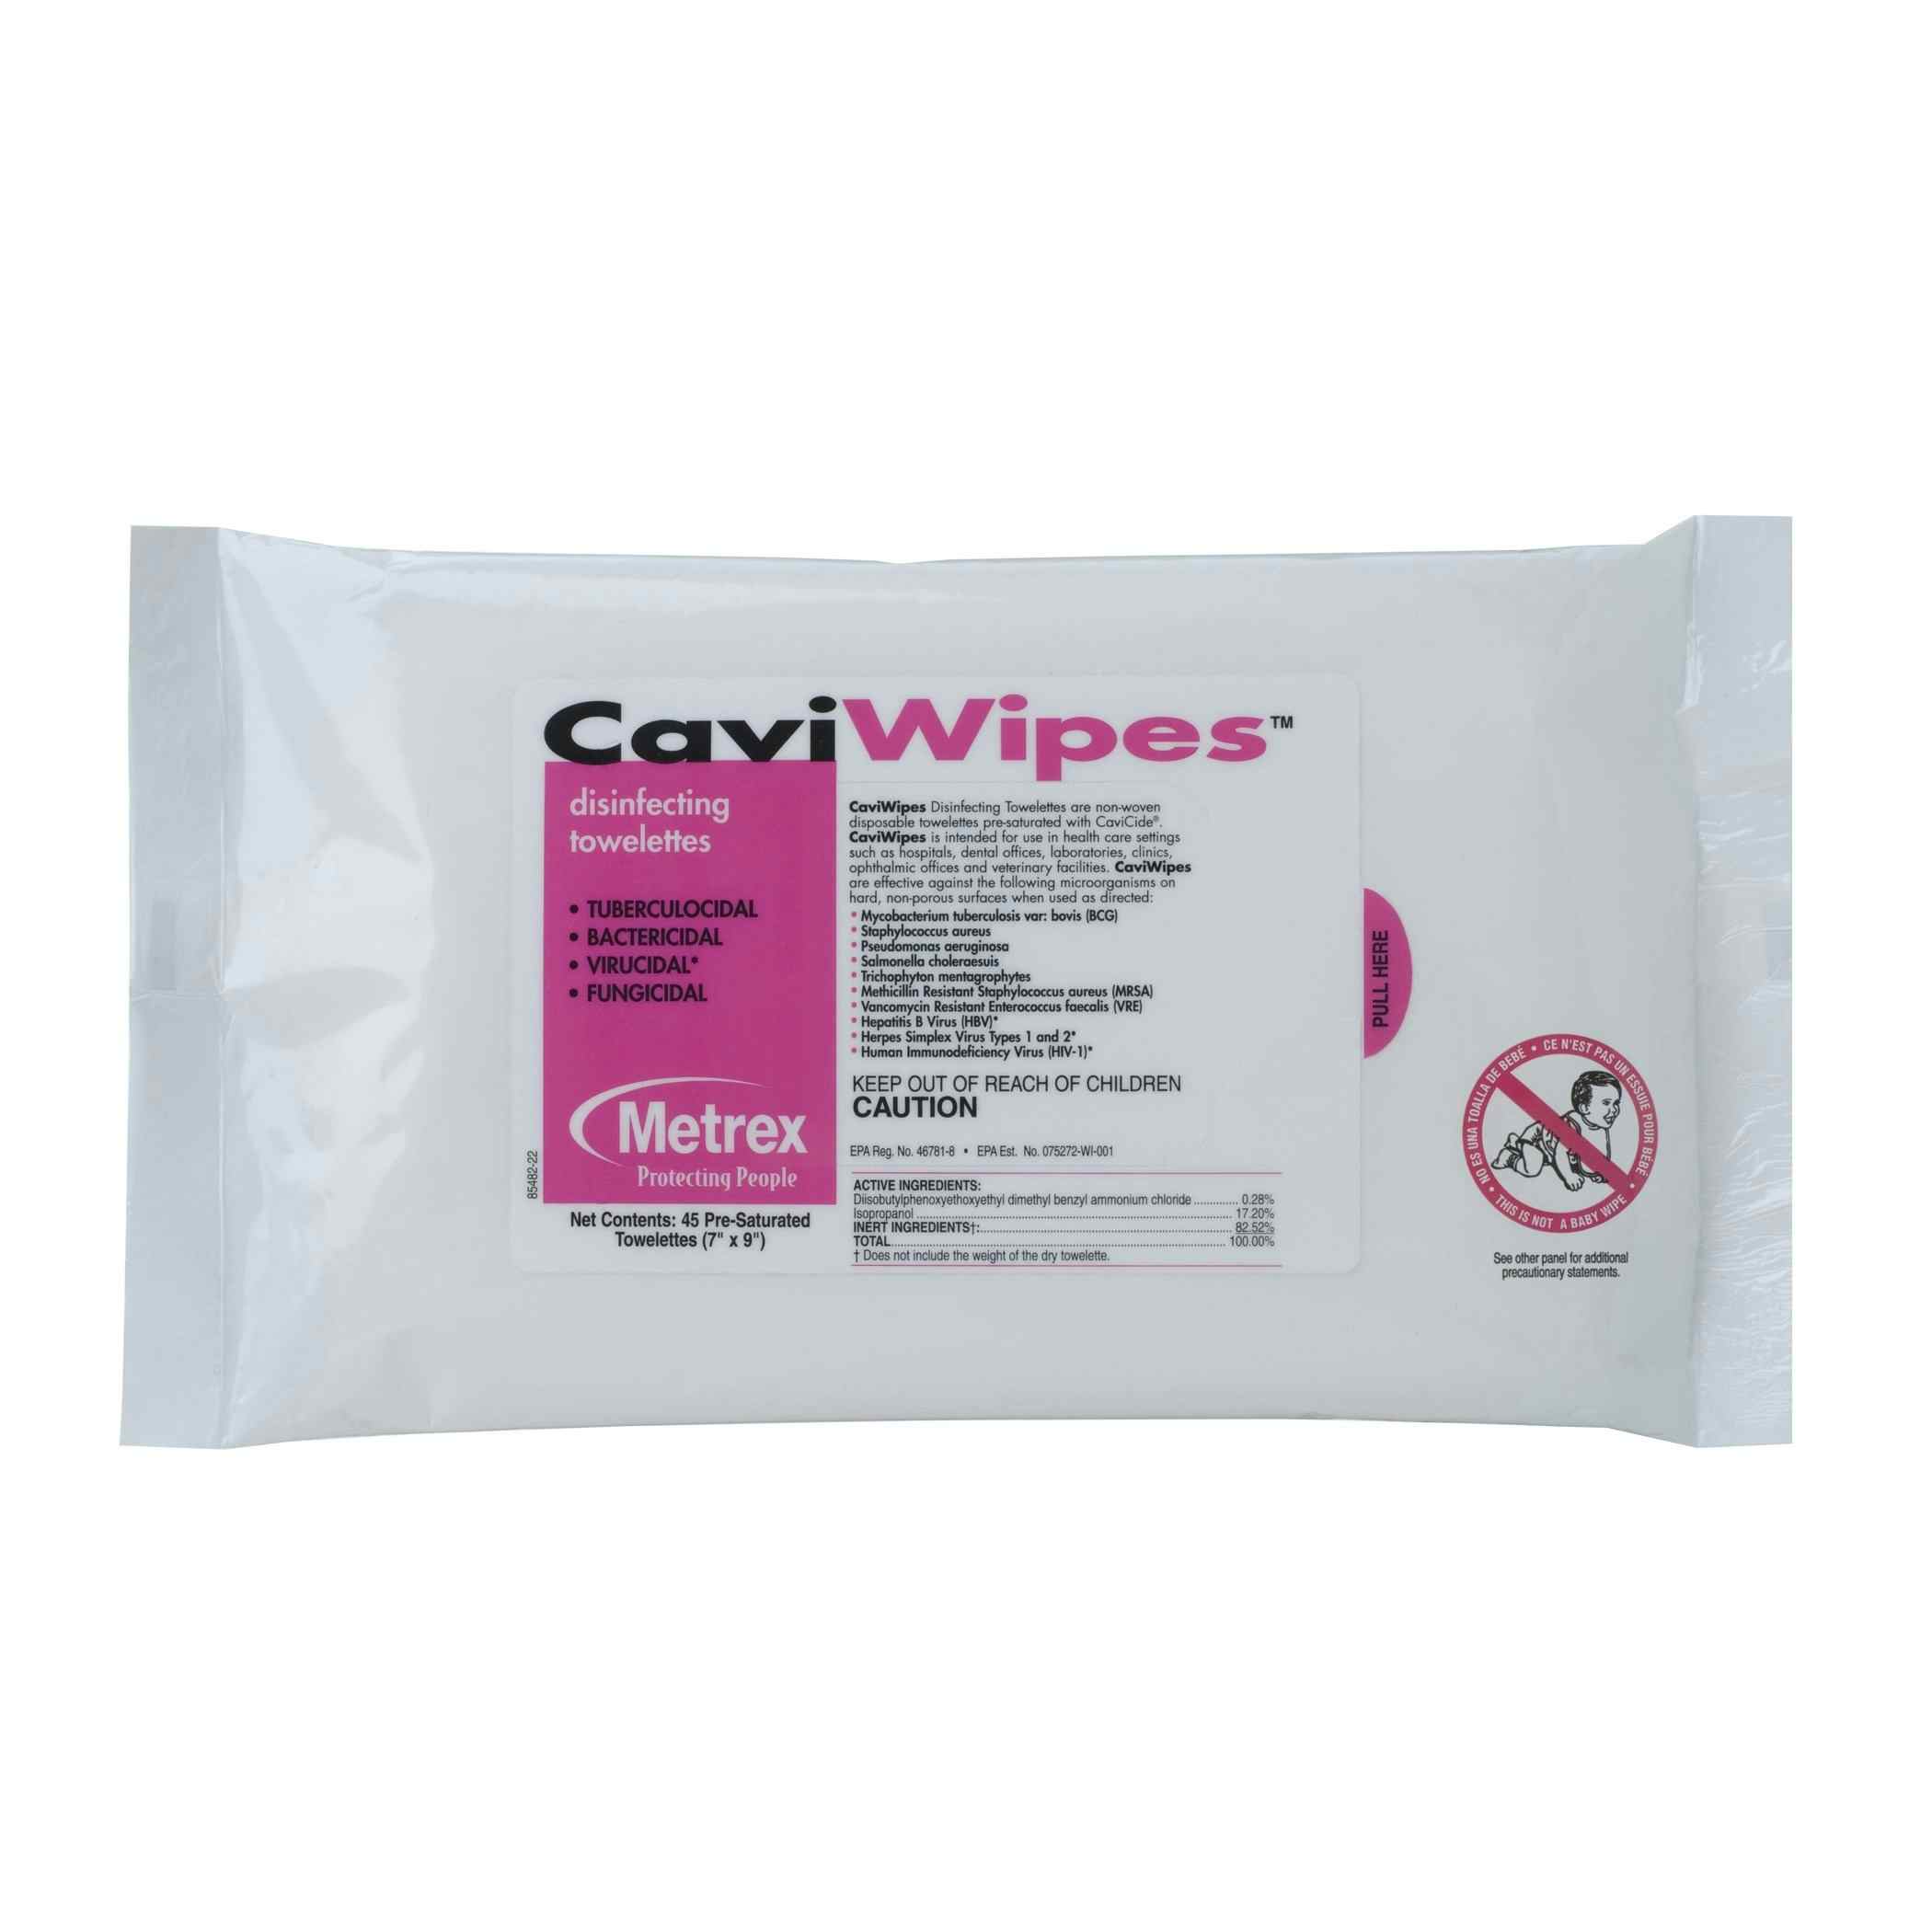 CaviWipes Disinfecting Towelettes, 7 X 9", 13-1224, Pack of 45